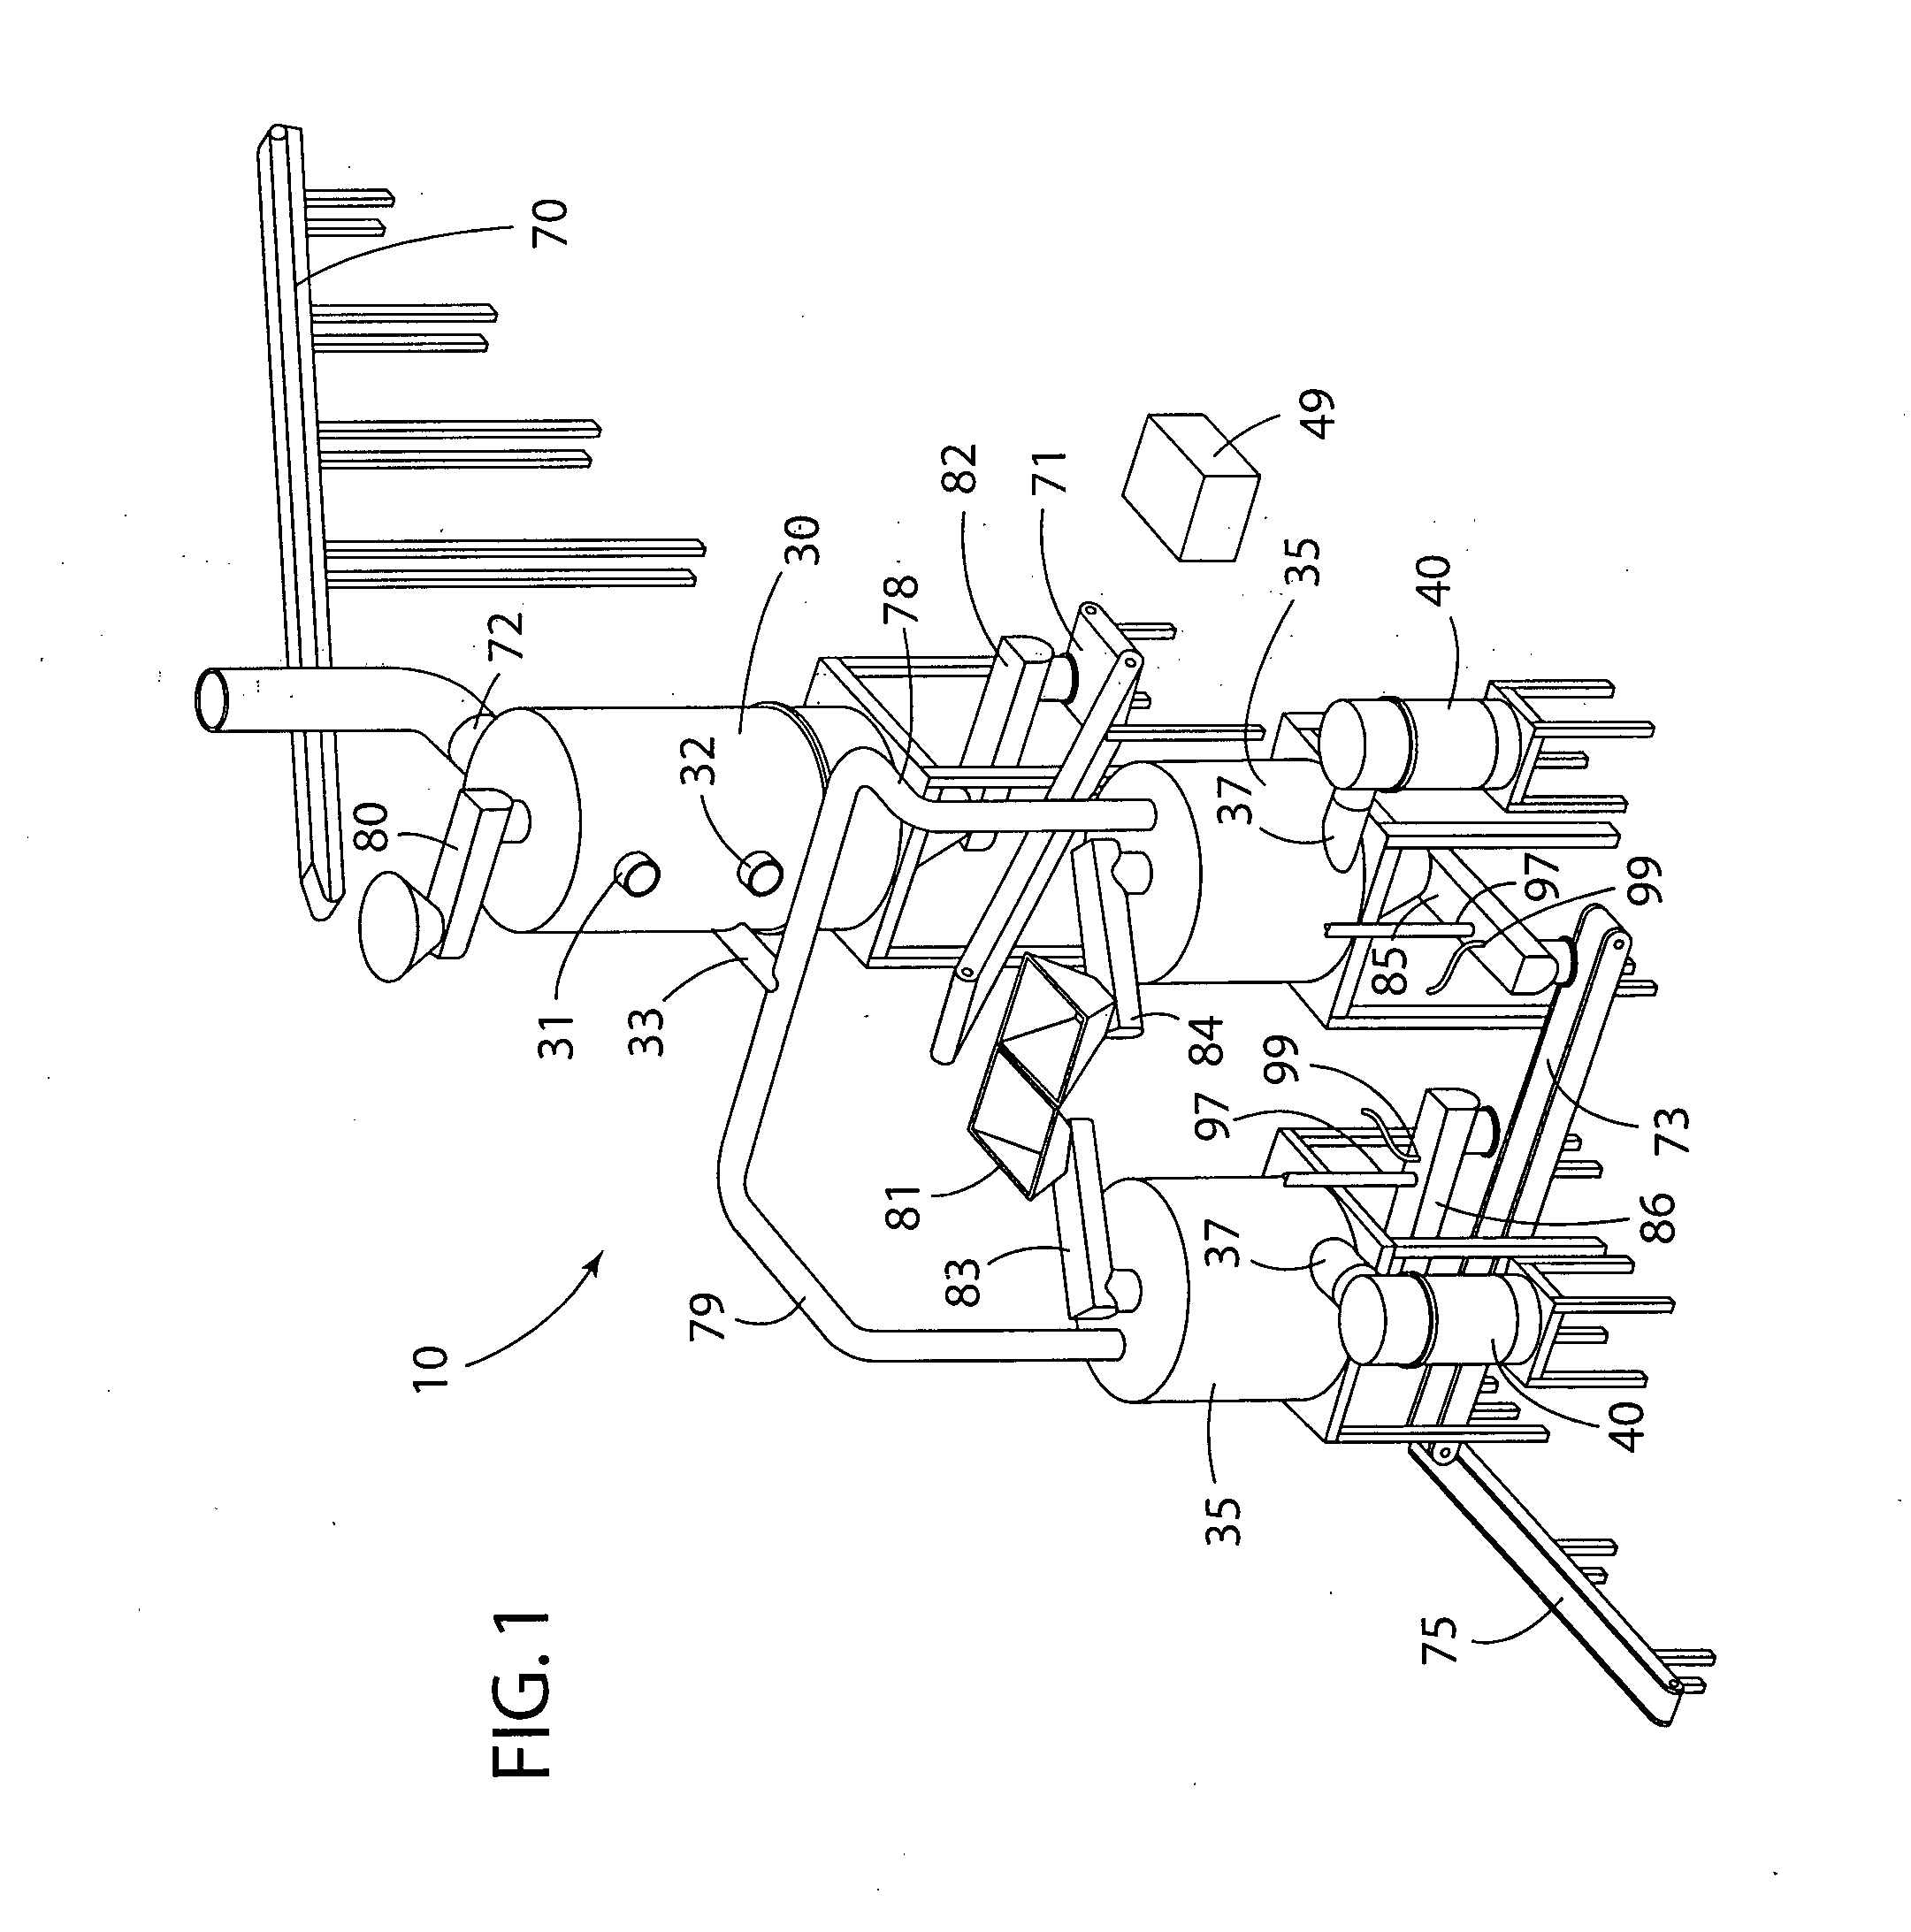 Device for upgrading solid organic materials